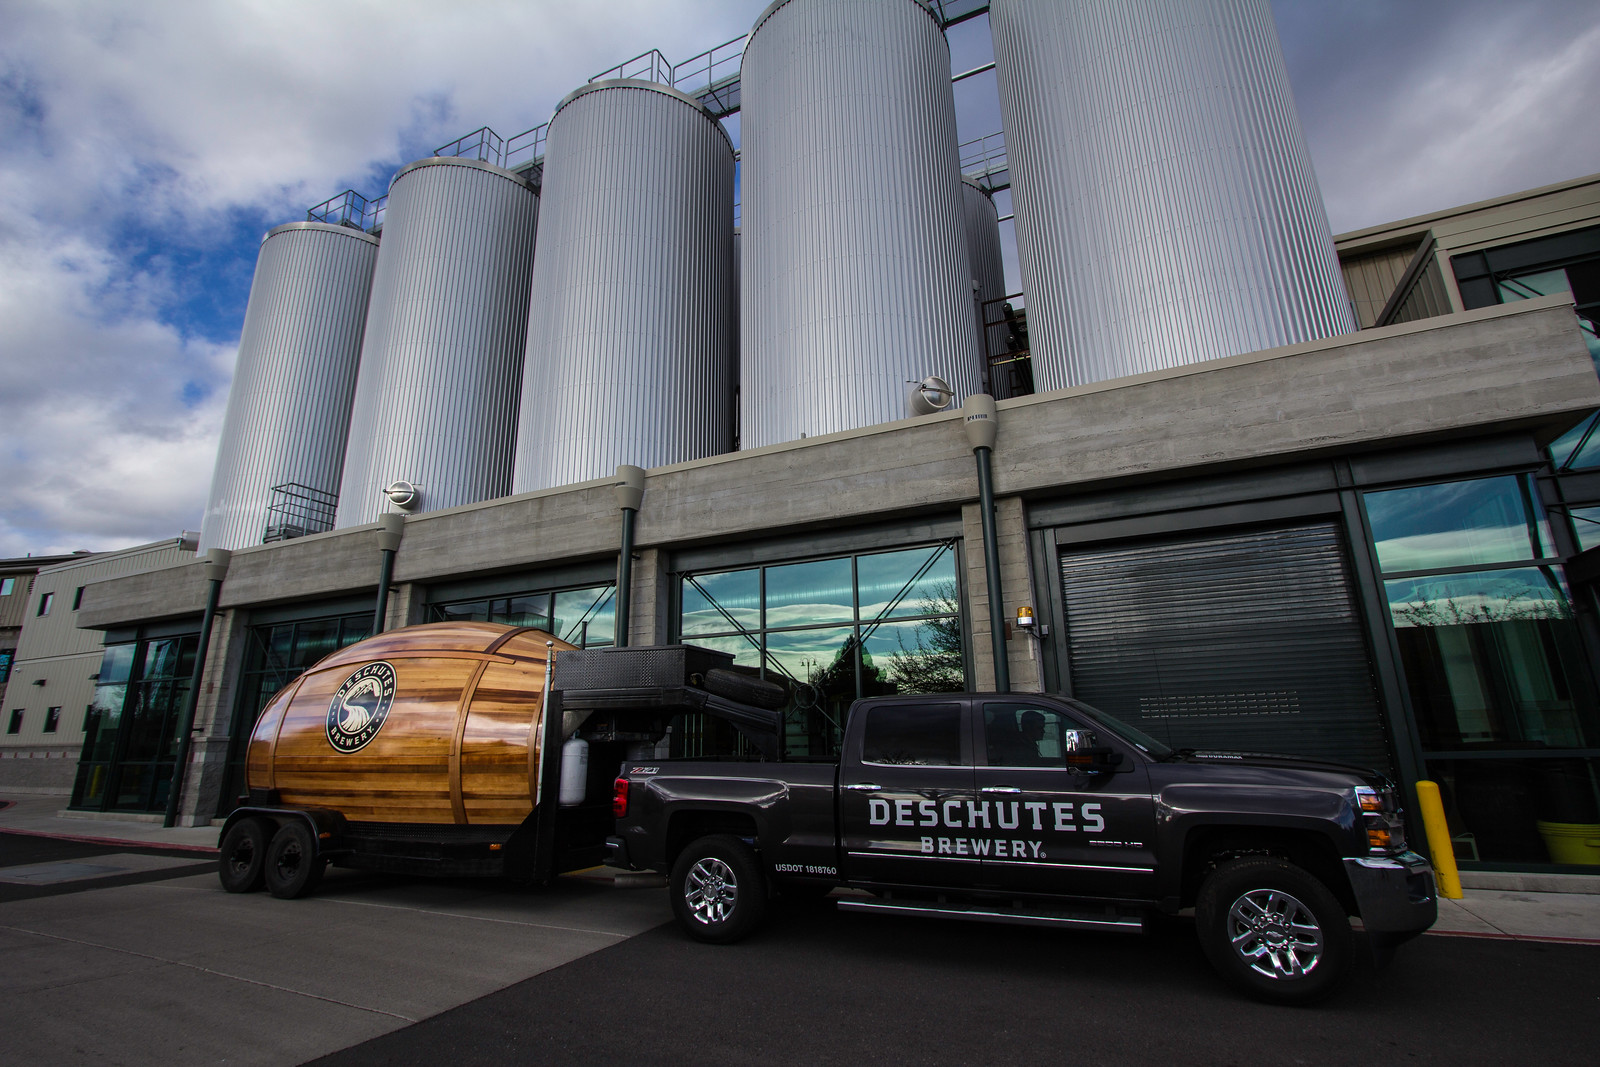 A pickup truck towing a giant beer keg is parked in front of a Deschutes brewery.